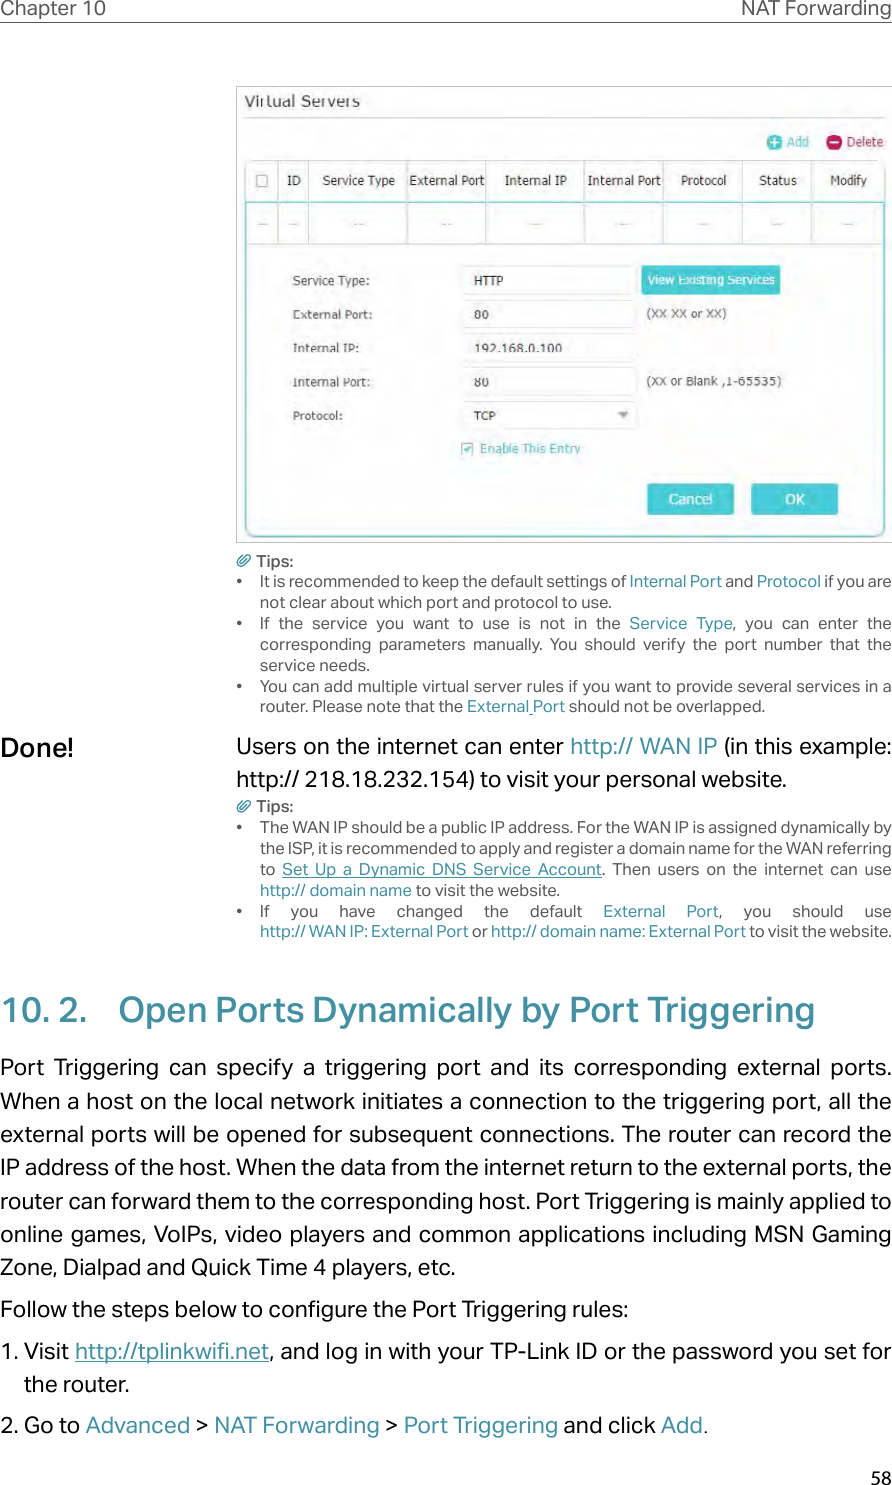 58Chapter 10 NAT ForwardingTips:•  It is recommended to keep the default settings of Internal Port and Protocol if you are not clear about which port and protocol to use.•  If the service you want to use is not in the Service Type, you can enter the corresponding parameters manually. You should verify the port number that the service needs.•  You can add multiple virtual server rules if you want to provide several services in a router. Please note that the External Port should not be overlapped.Users on the internet can enter http:// WAN IP (in this example: http:// 218.18.232.154) to visit your personal website.Tips:•  The WAN IP should be a public IP address. For the WAN IP is assigned dynamically by the ISP, it is recommended to apply and register a domain name for the WAN referring to  Set Up a Dynamic DNS Service Account. Then users on the internet can use  http:// domain name to visit the website.•  If you have changed the default External Port, you should use  http:// WAN IP: External Port or http:// domain name: External Port to visit the website.10. 2.  Open Ports Dynamically by Port TriggeringPort Triggering can specify a triggering port and its corresponding external ports. When a host on the local network initiates a connection to the triggering port, all the external ports will be opened for subsequent connections. The router can record the IP address of the host. When the data from the internet return to the external ports, the router can forward them to the corresponding host. Port Triggering is mainly applied to online games, VoIPs, video players and common applications including MSN Gaming Zone, Dialpad and Quick Time 4 players, etc. Follow the steps below to configure the Port Triggering rules:1. Visit http://tplinkwifi.net, and log in with your TP-Link ID or the password you set for the router.2. Go to Advanced &gt; NAT Forwarding &gt; Port Triggering and click Add.Done!